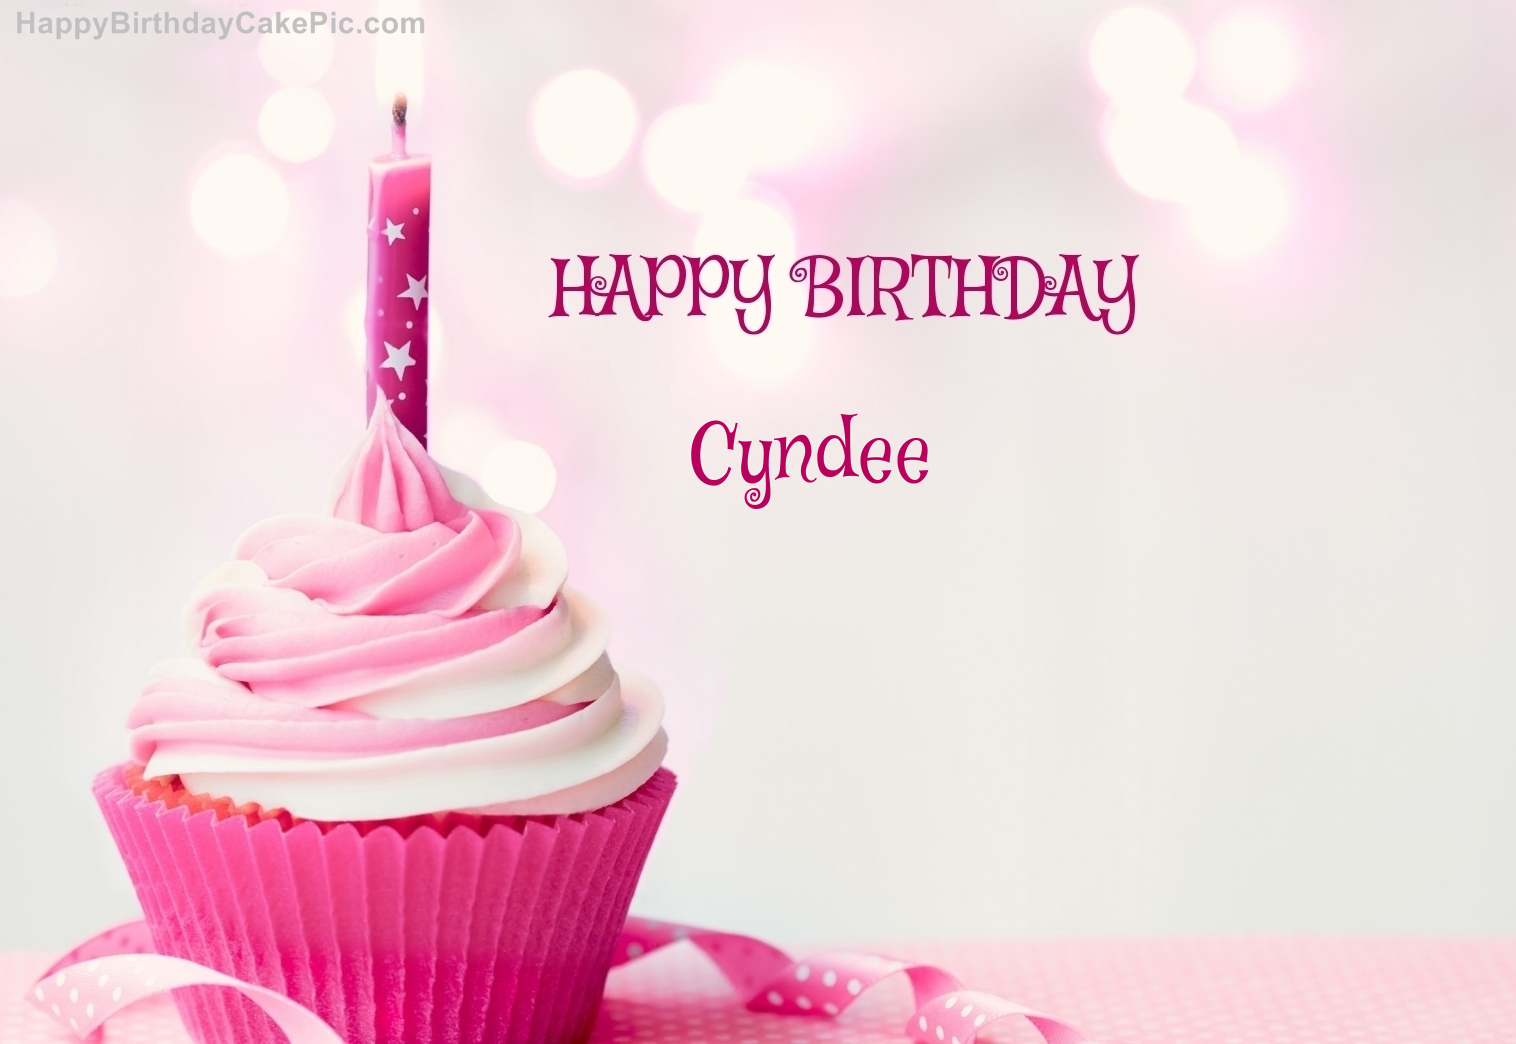 https://happybirthdaycakepic.com/pic-preview/Cyndee/7/happy-birthday-cupcake-candle-pink-picture-for-Cyndee.